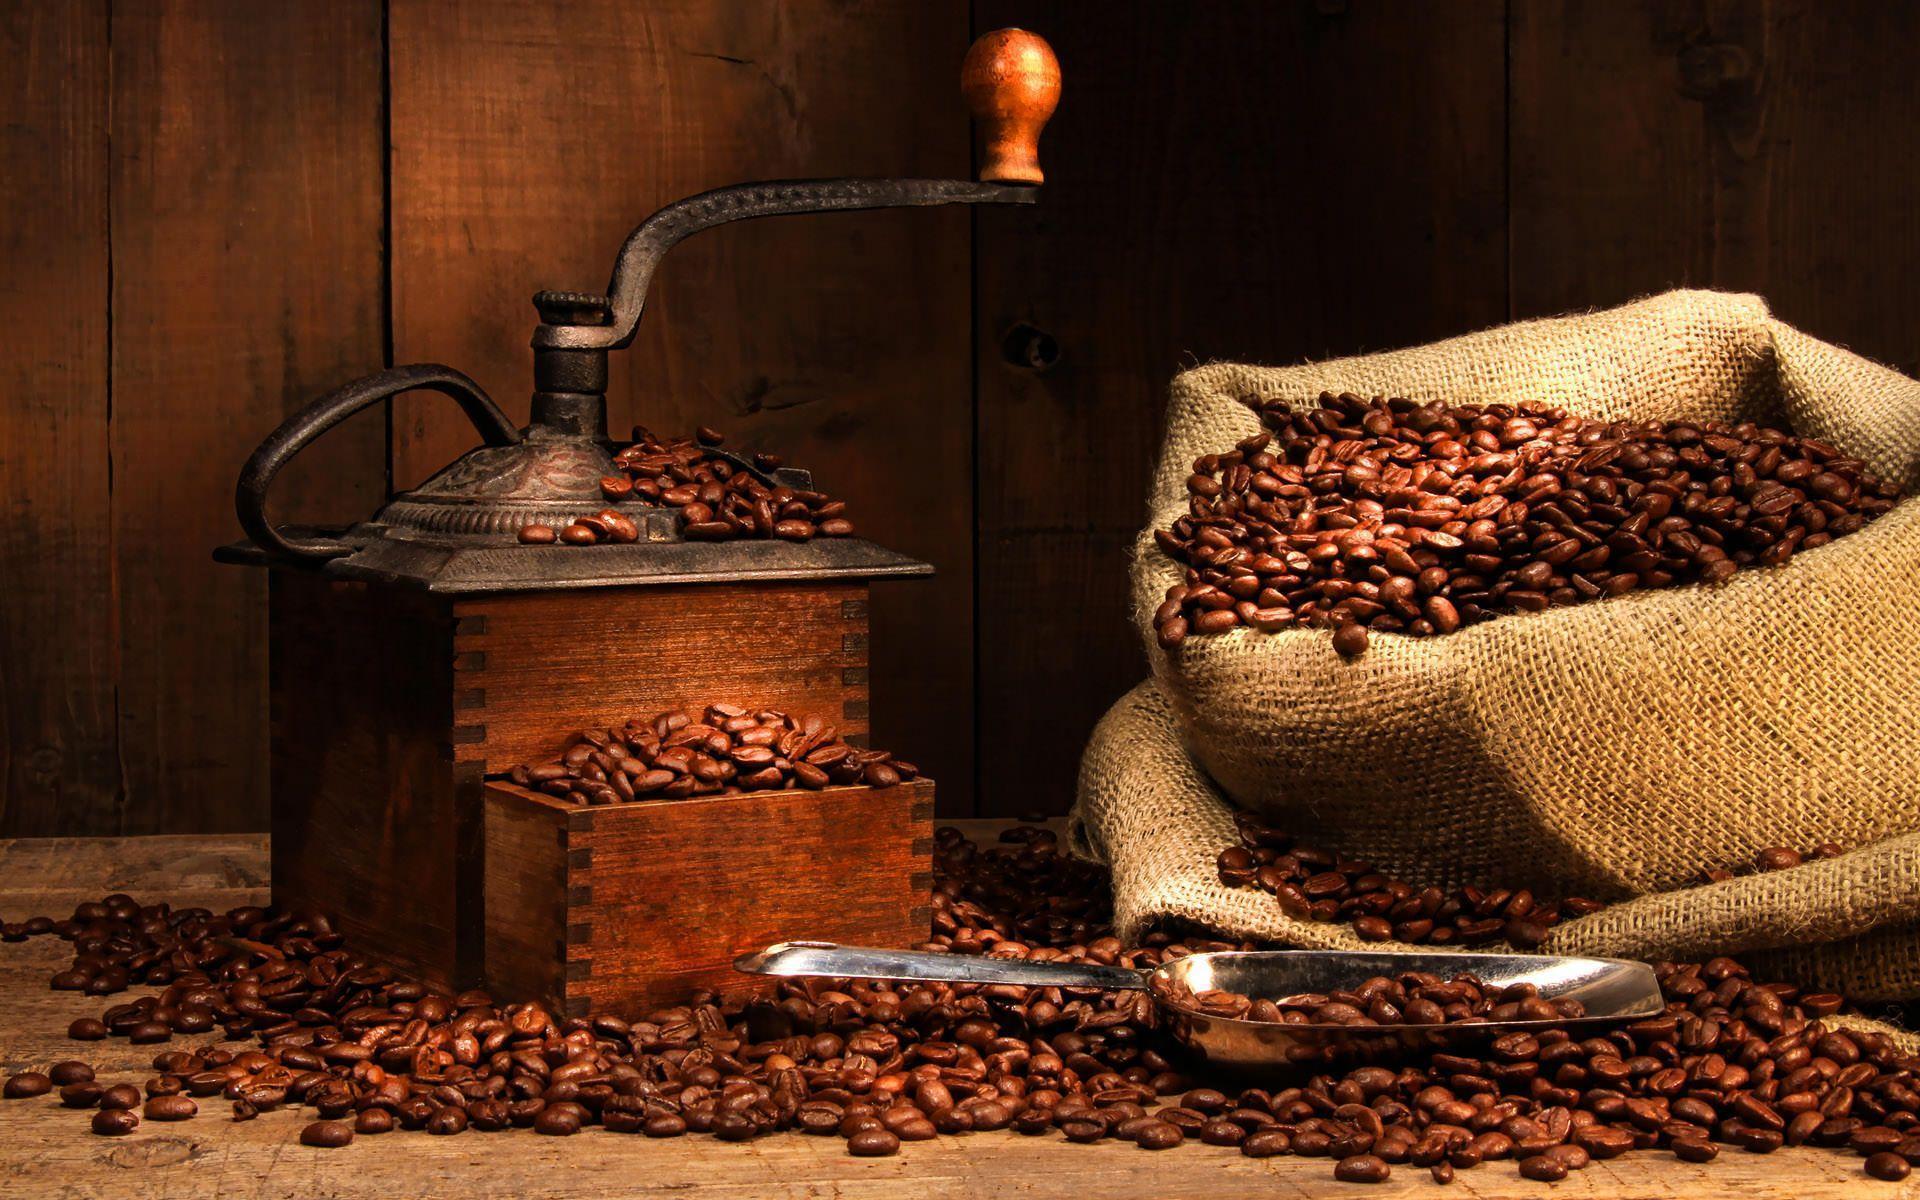 Coffee Wallpaper, Background, Image, Picture. Design